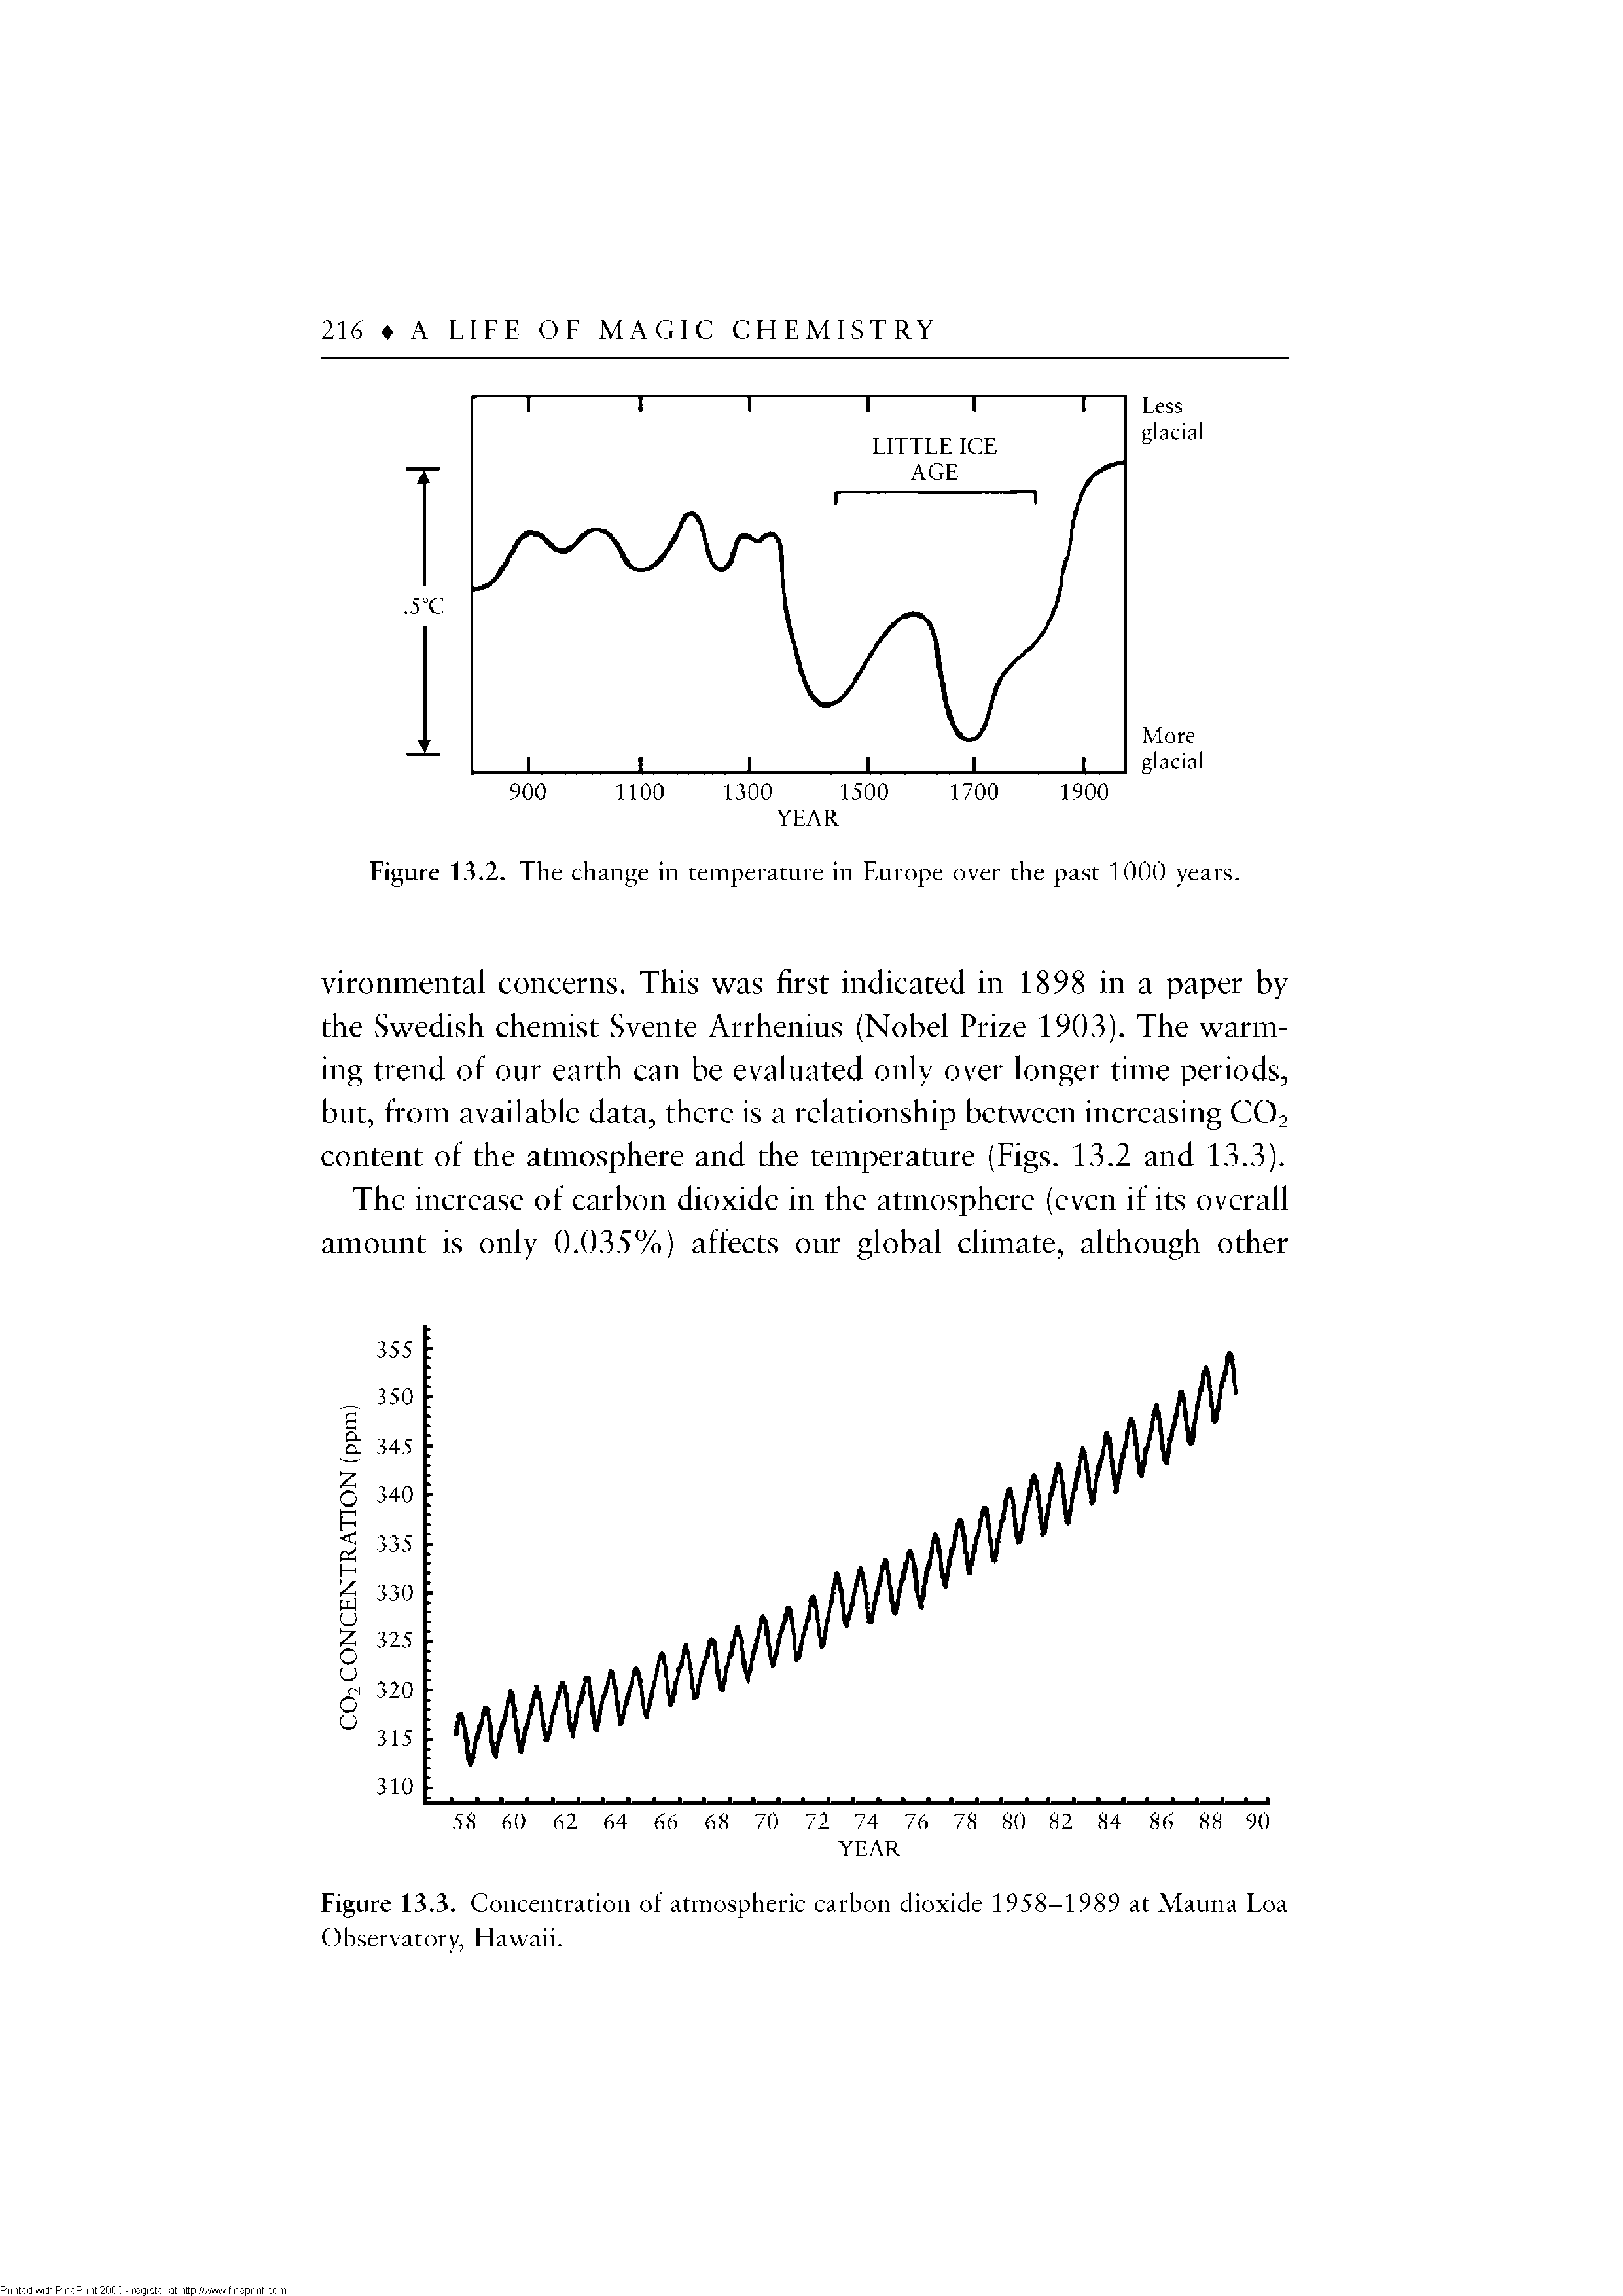 Figure 13.3. Concentration of atmospheric carbon dioxide 1958-1989 at Mauna Loa Observatory, Hawaii.